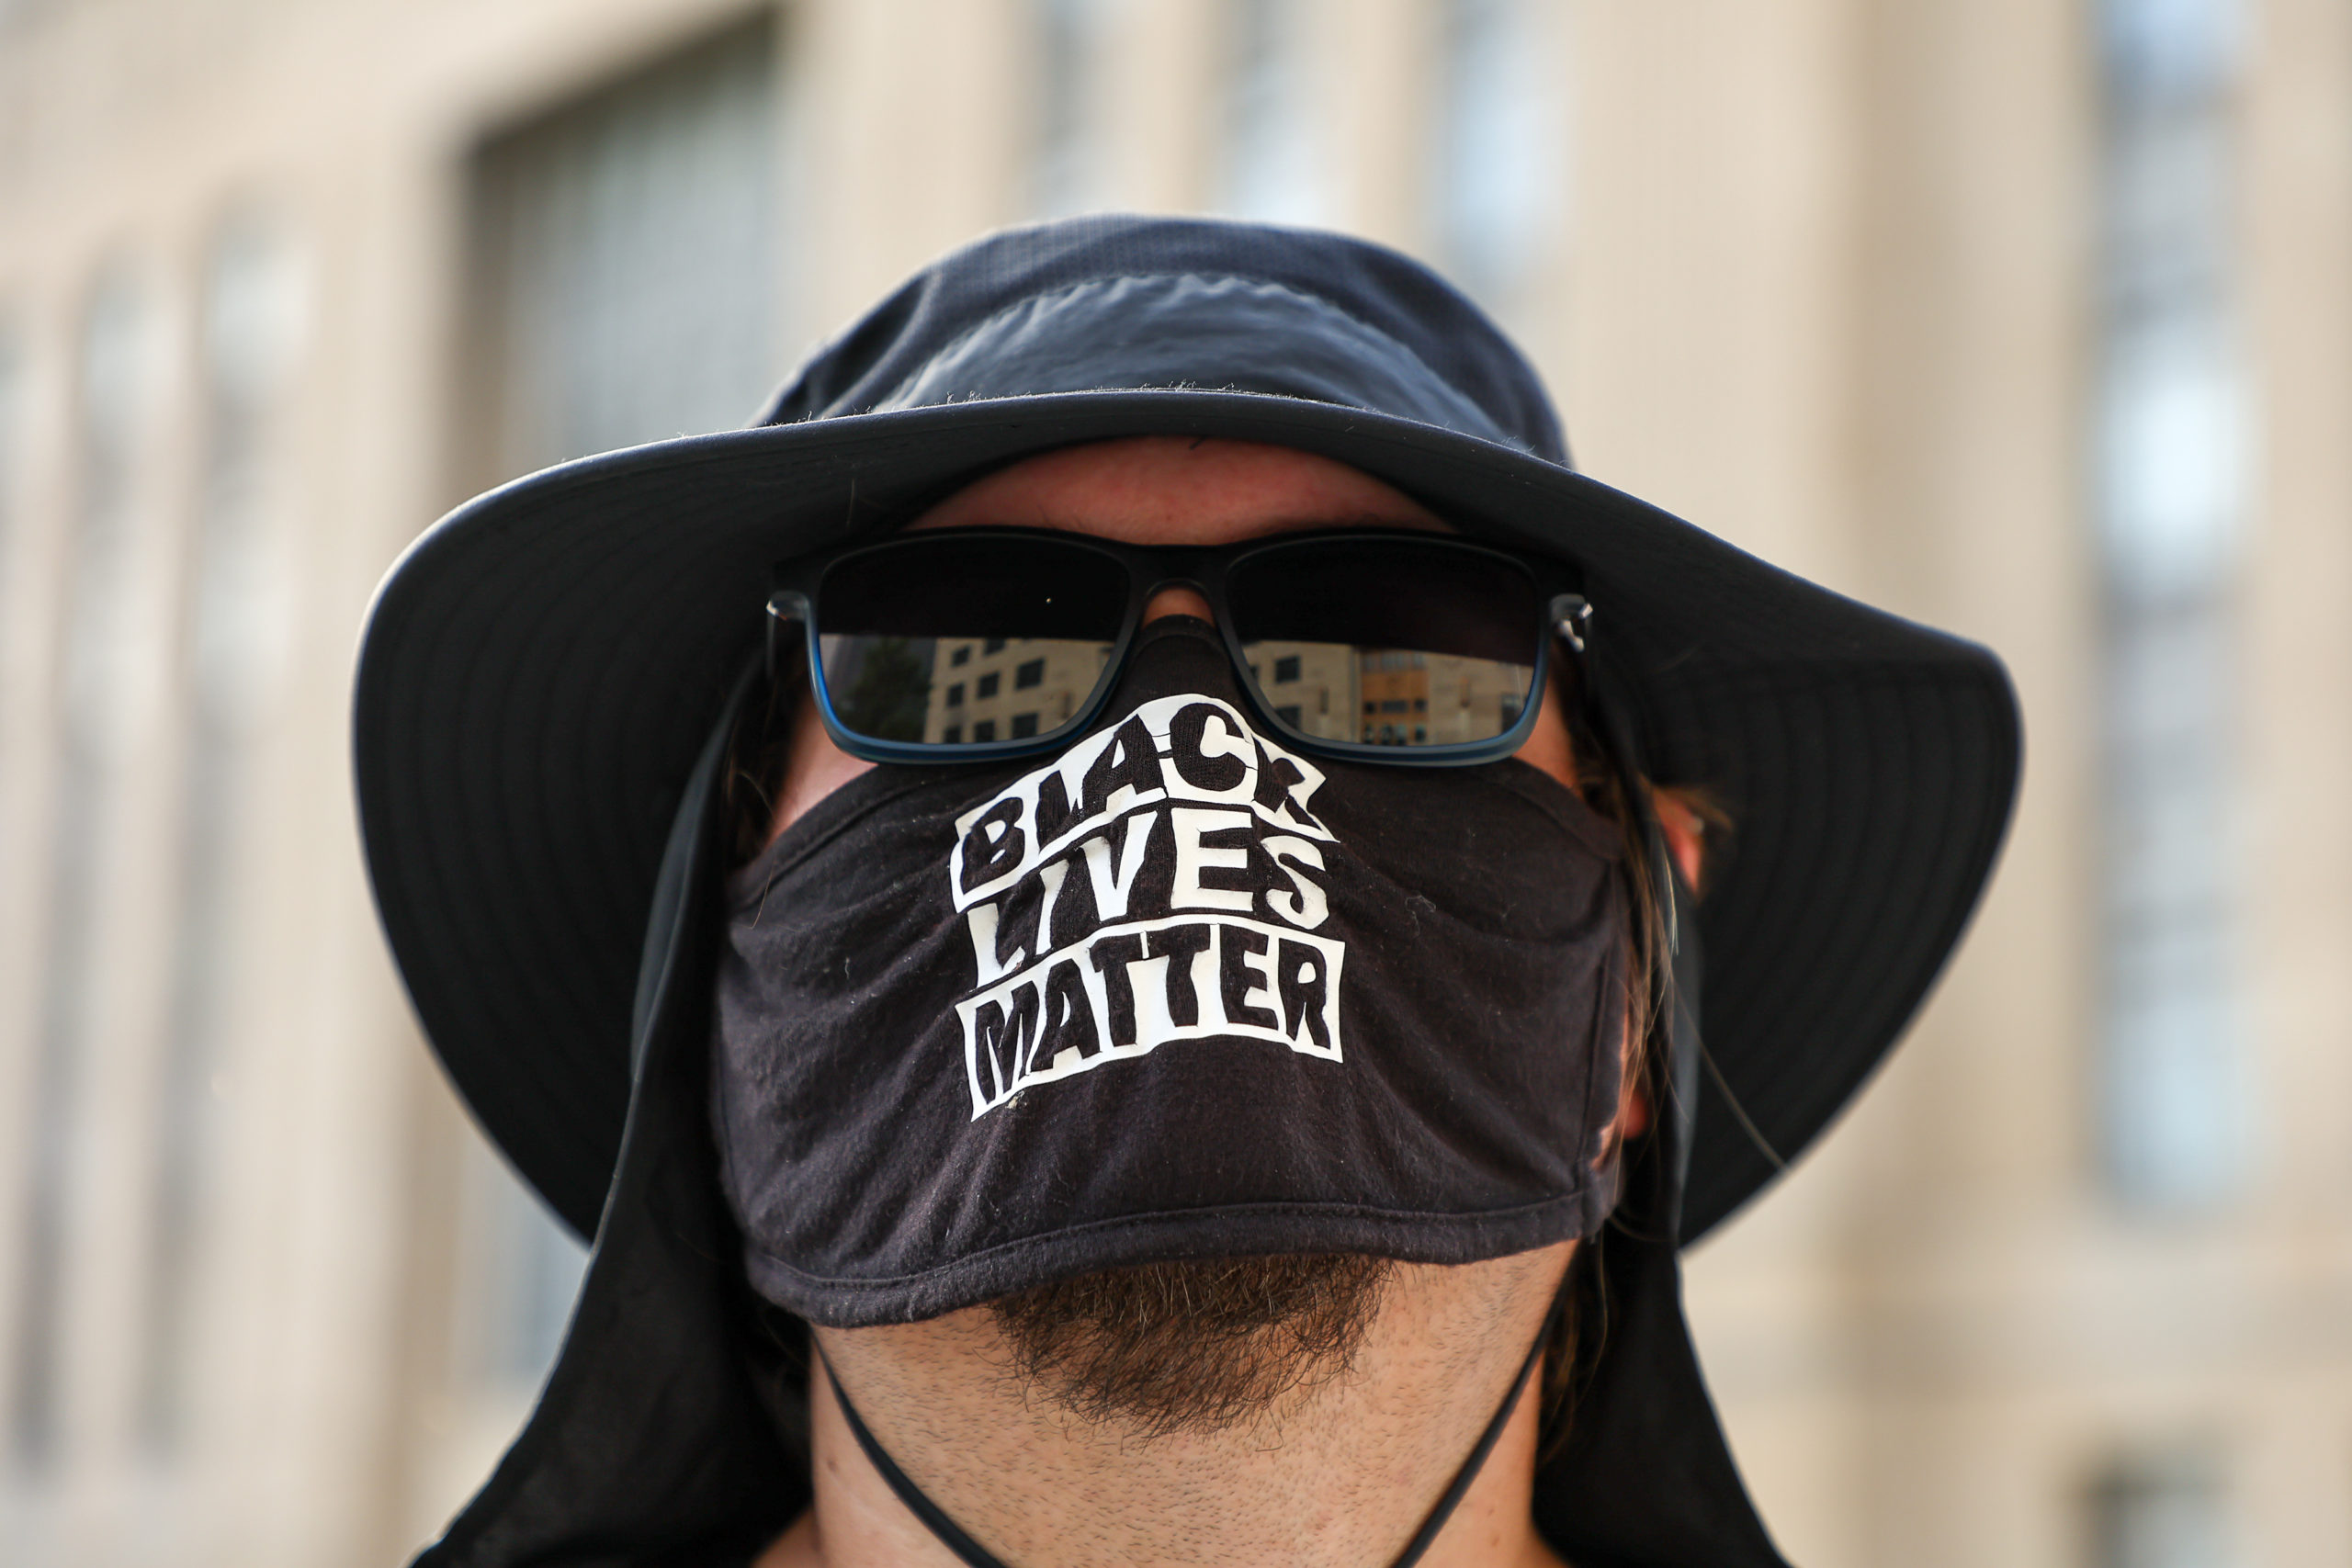 Black Lives Matter face mask seen during a protest in rememberance of Black lives lost at the hands of Kansas City police on June 10, 2022 in Kansas City, Missouri. (Photo by Arturo Holmes/Getty Images for National Urban League)